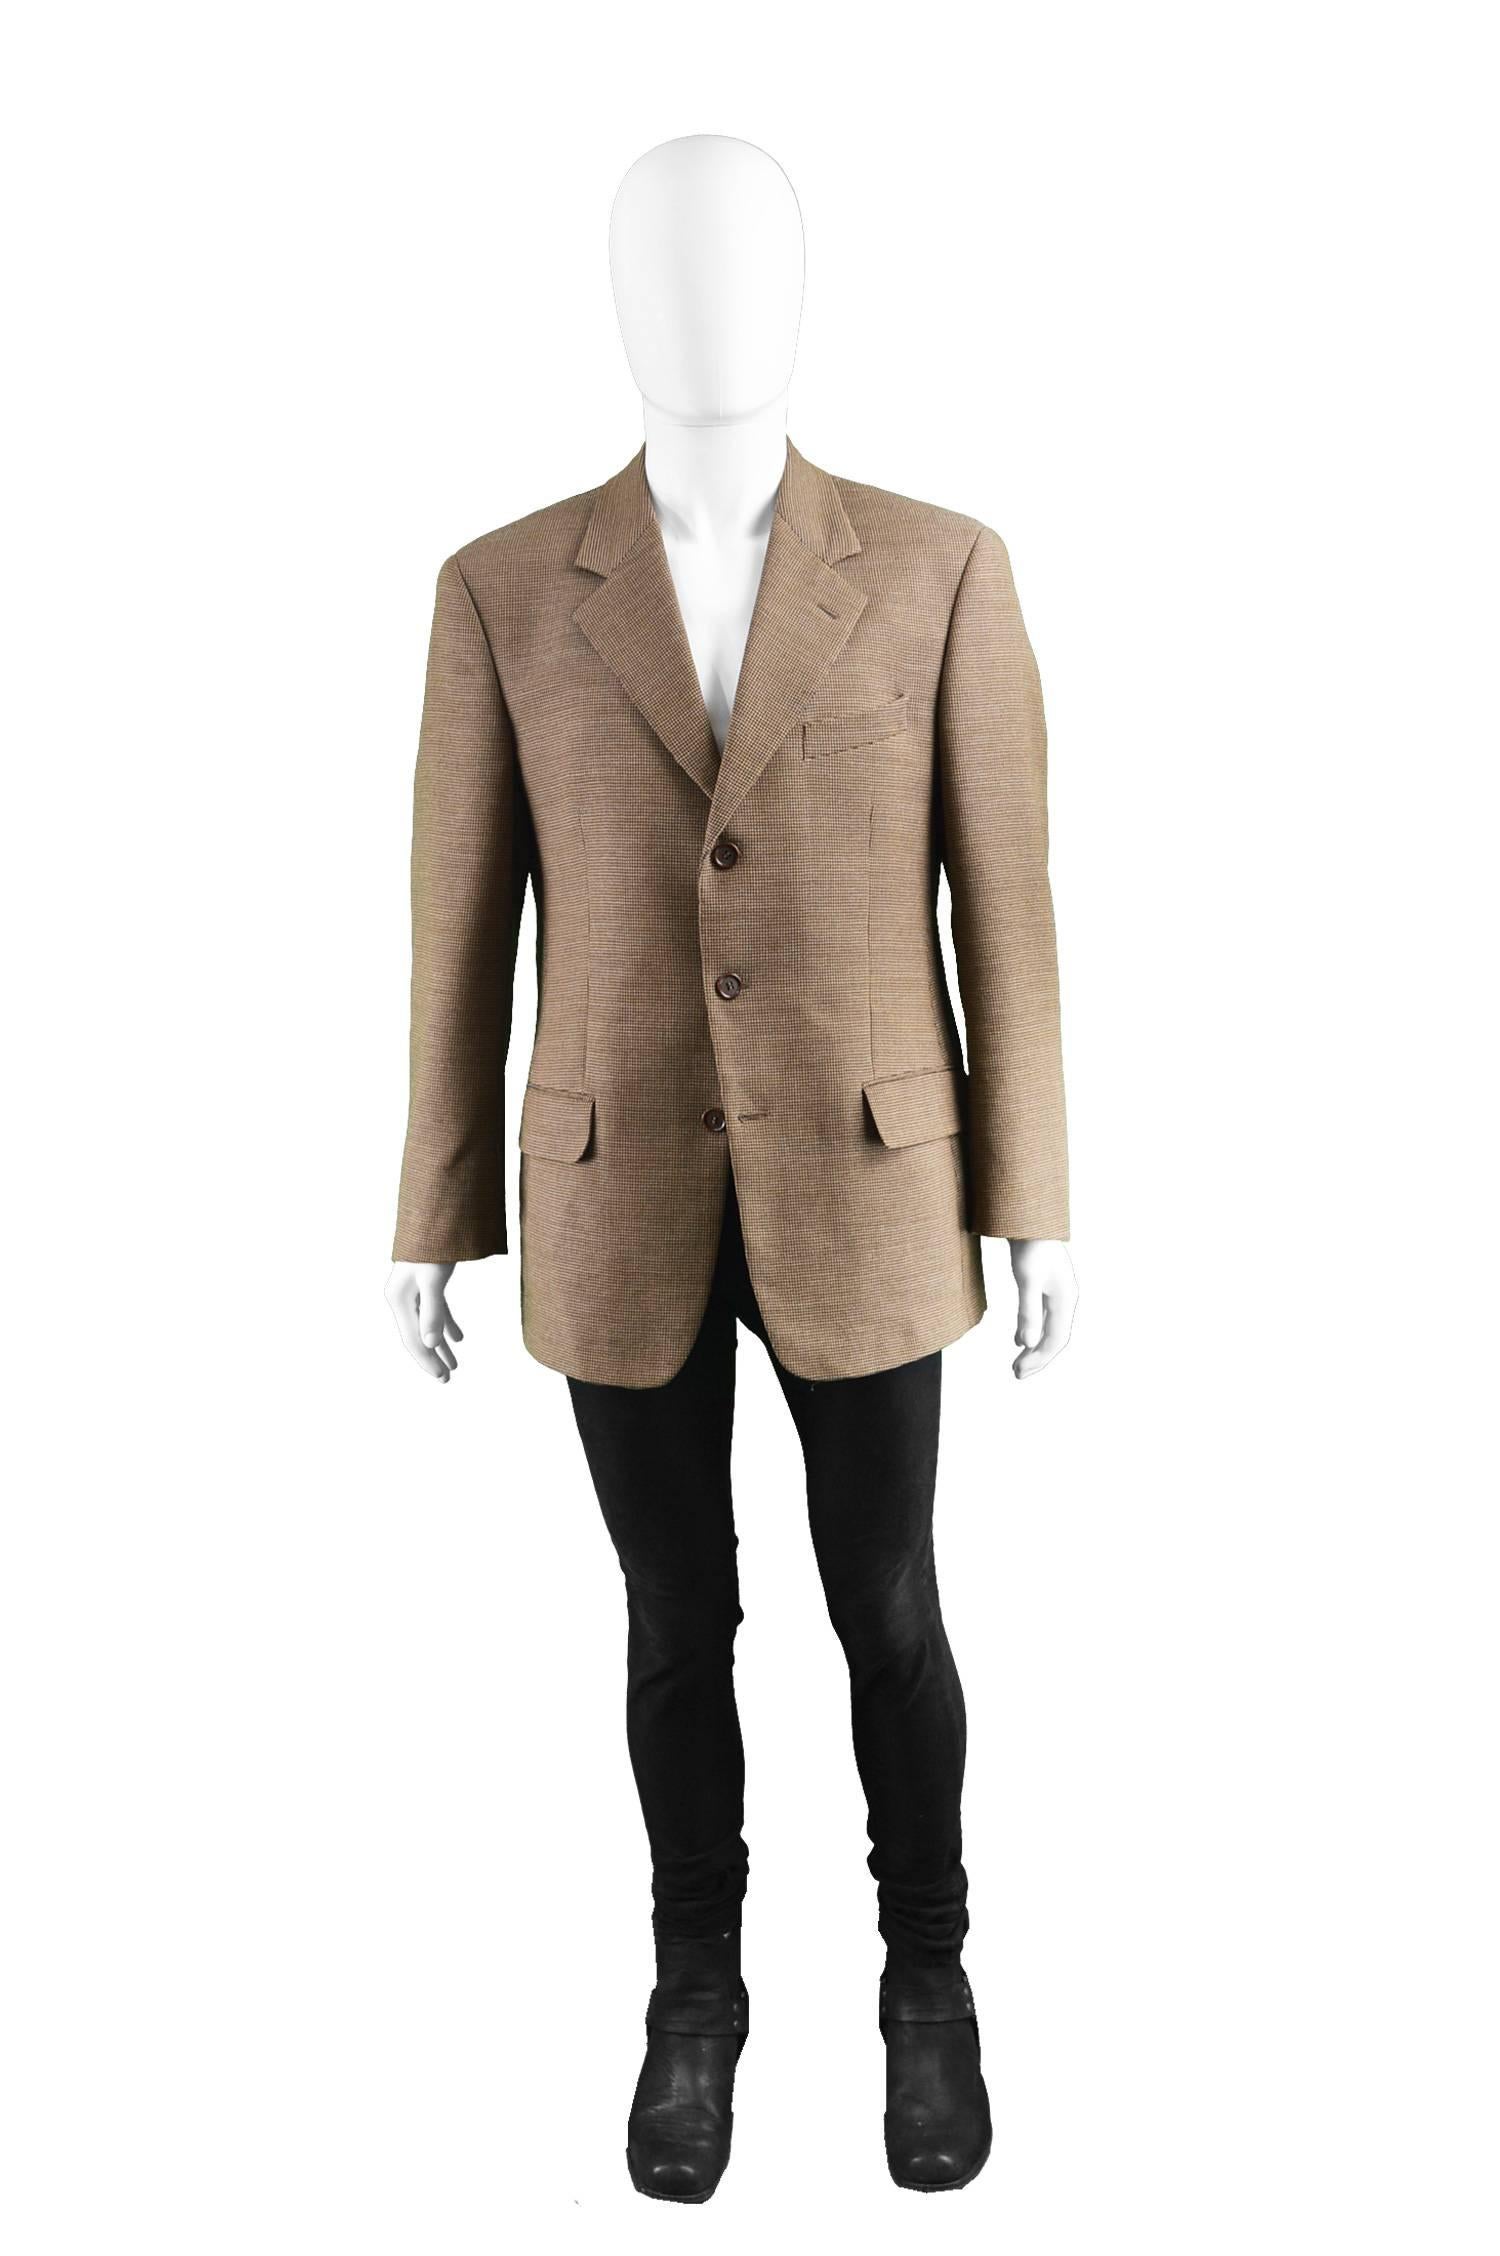 Valentino Vintage Men's Brown Woven Italian Wool Sportcoat, 1990s
Estimated Size: Men's Medium / 40R. Please check all measurements.
Chest - 42” / 106cm (please allow a couple of inches room for movement)
Length (Shoulder to Hem) - 29” /